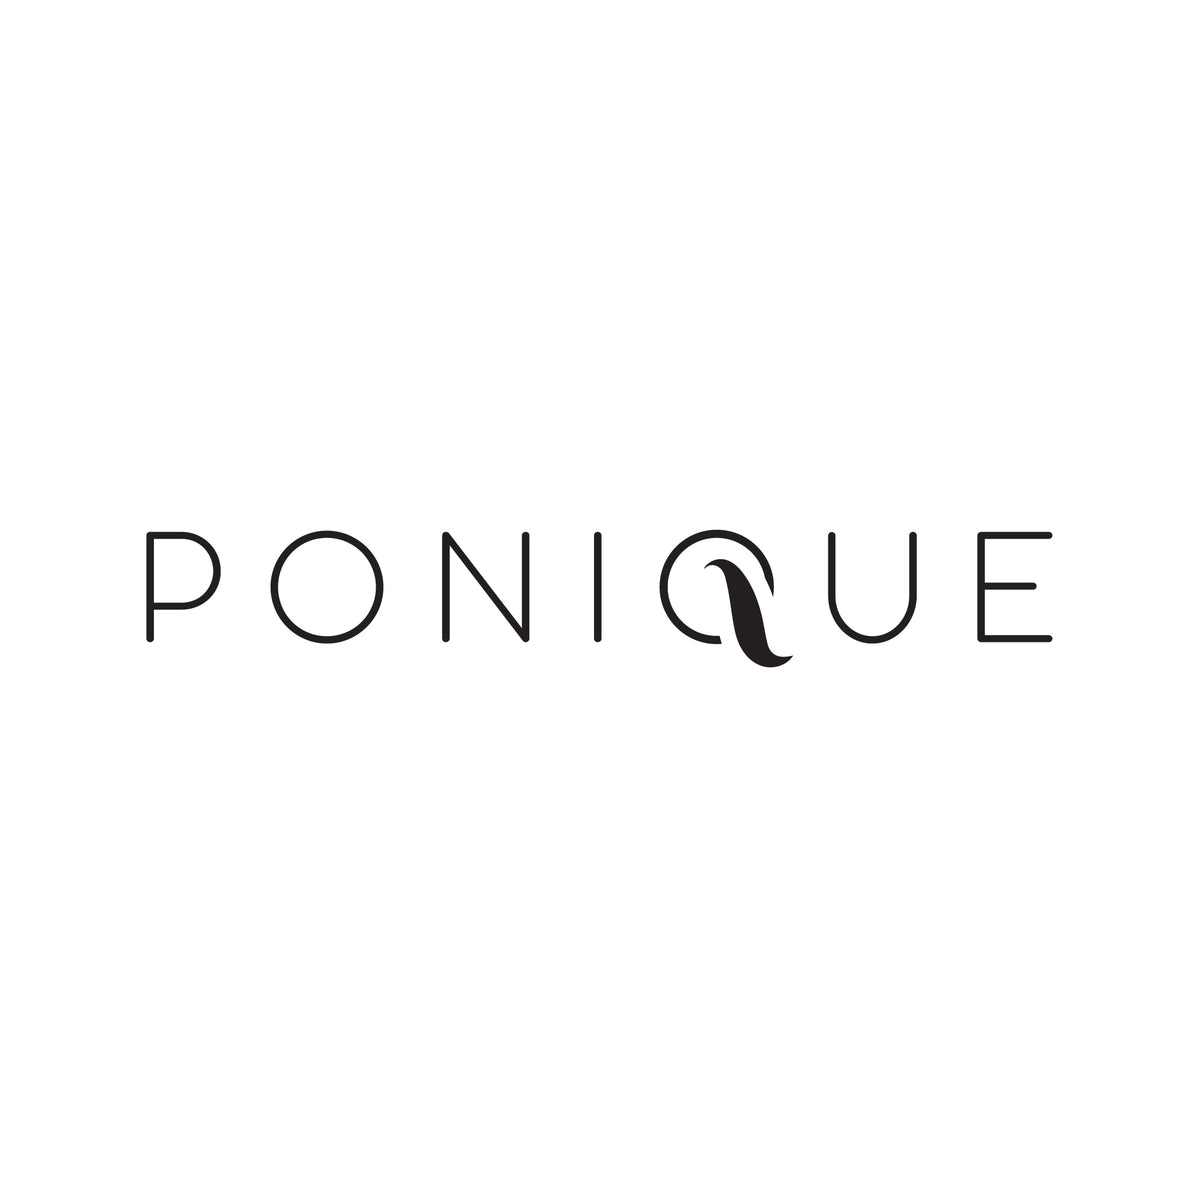 Ponique: Womens Fitness Wear for Active Lifestyles